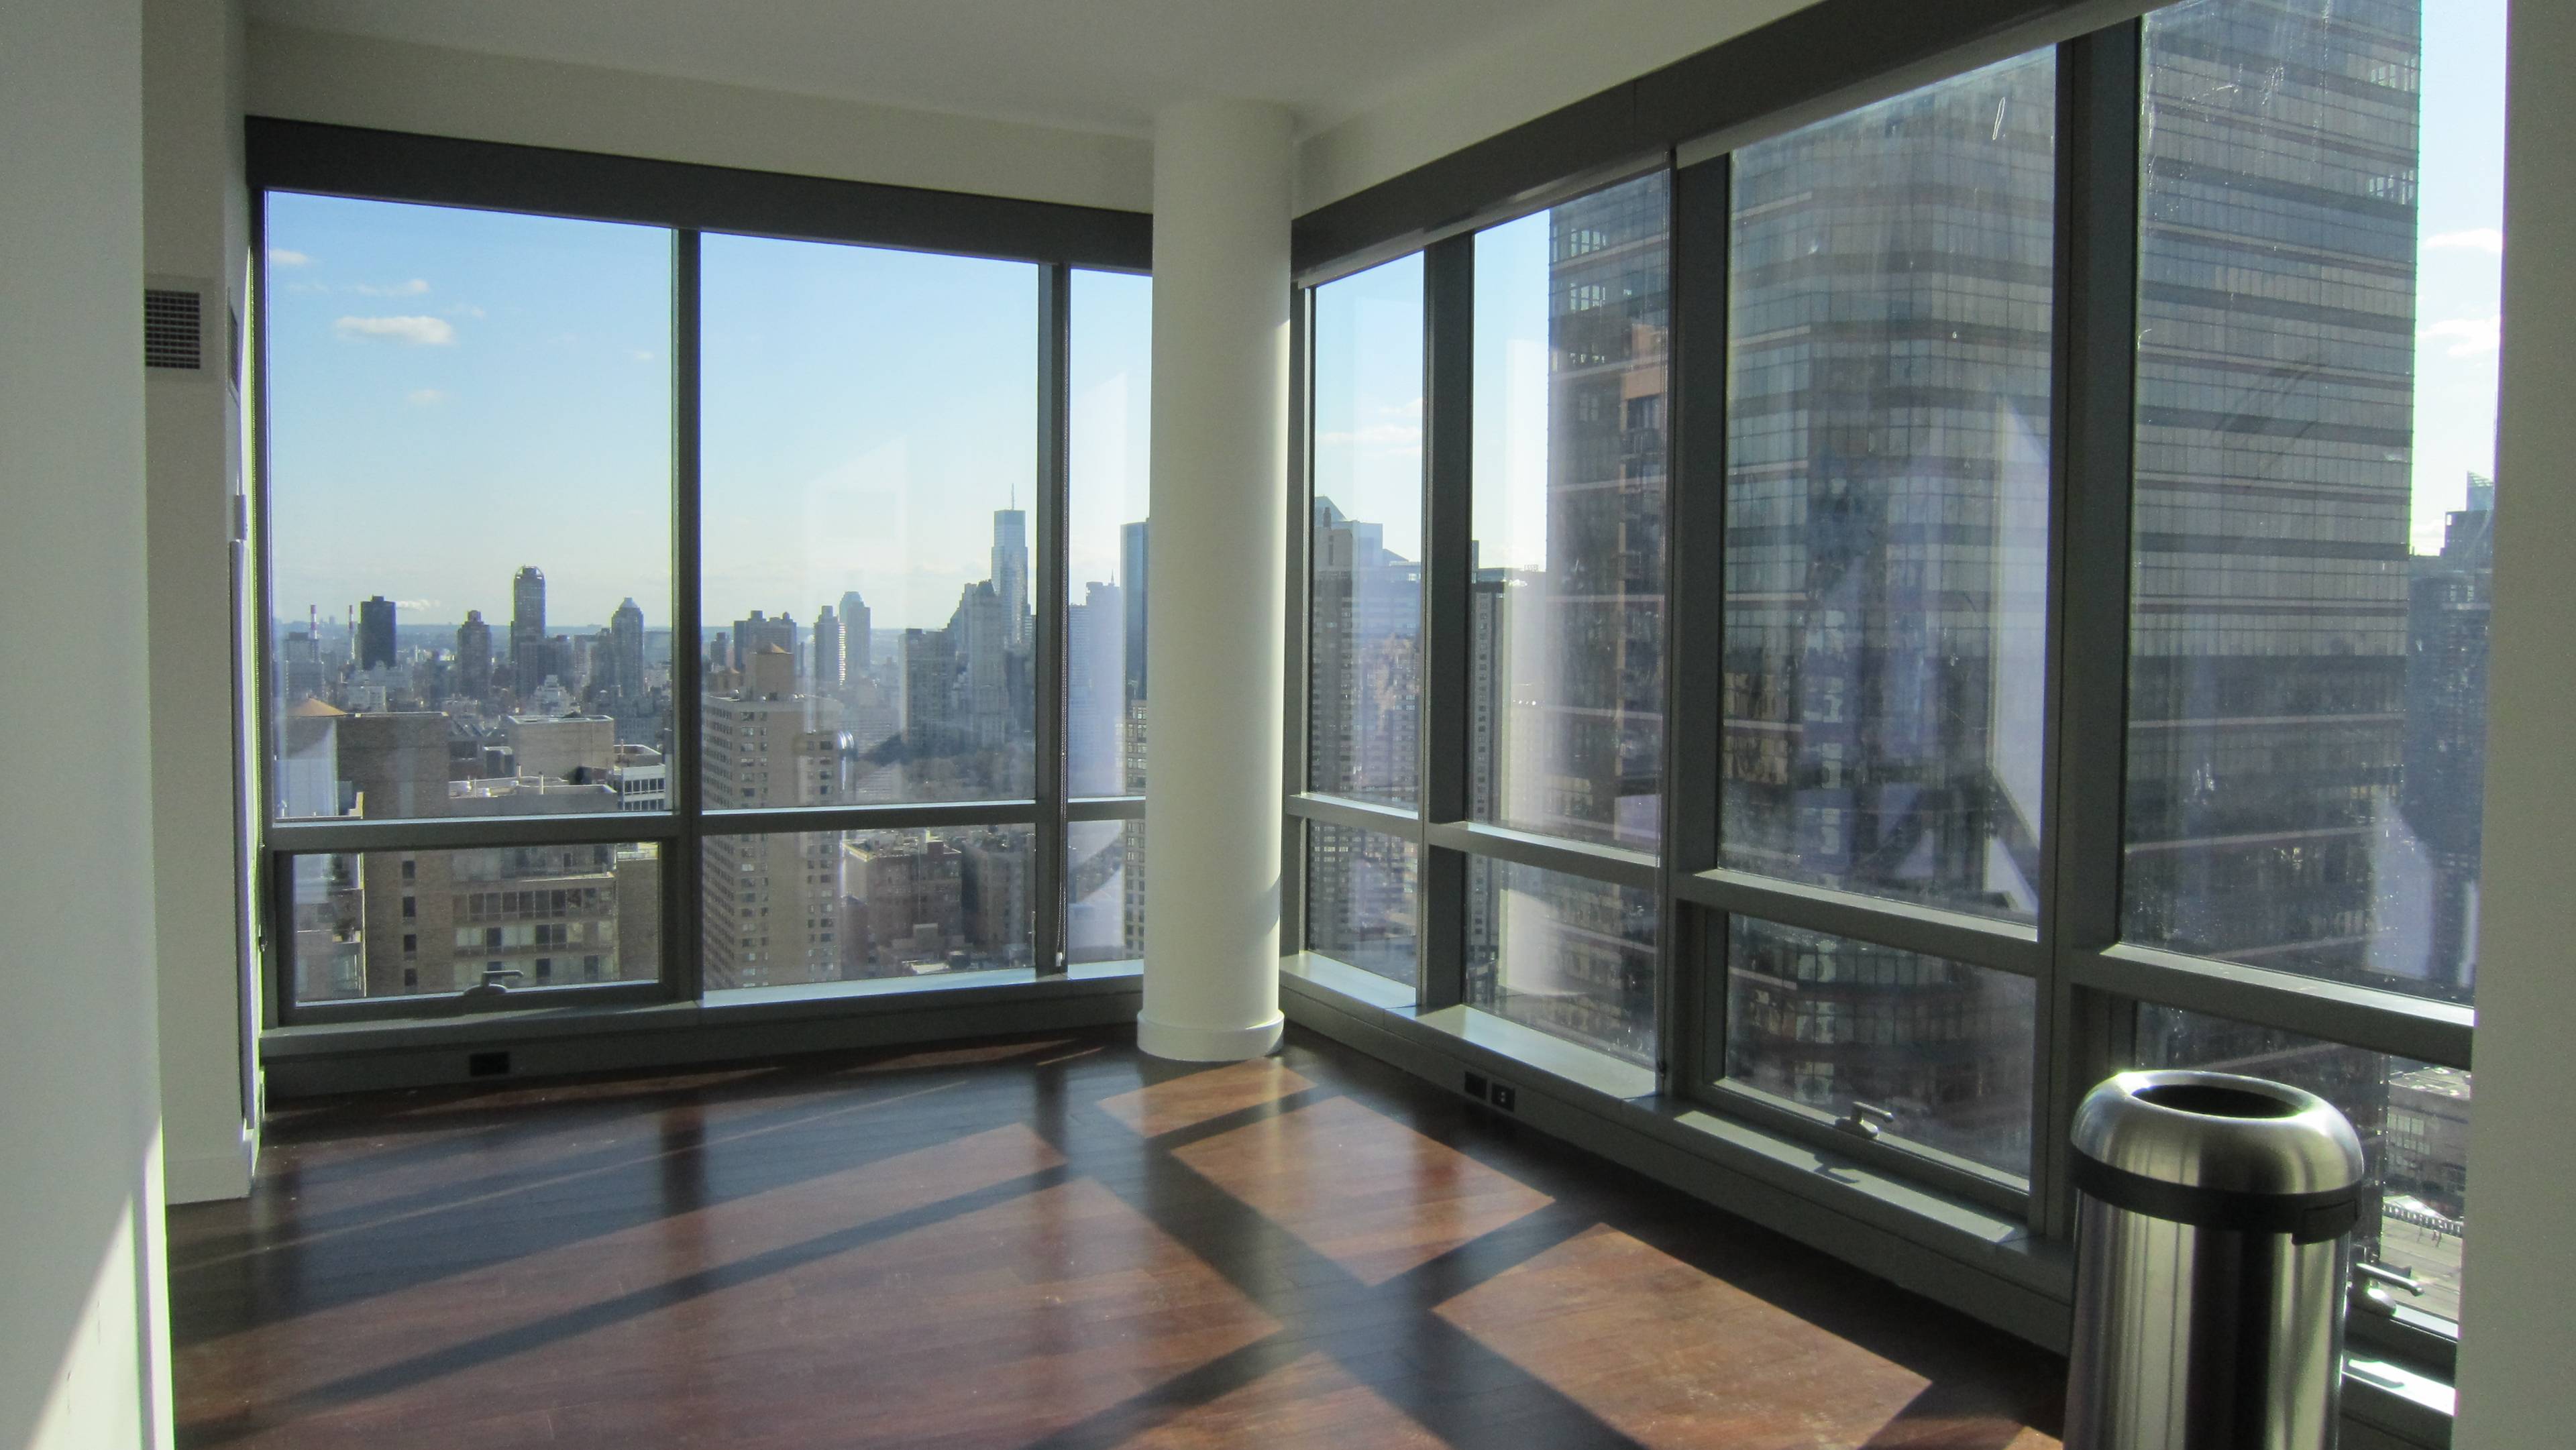 Breathtaking! 3 BR 3 BA Terrace.Central Air  W/D High Floor Upper West Side Minutes walk to Columbus Circle Lincoln Center Central Park